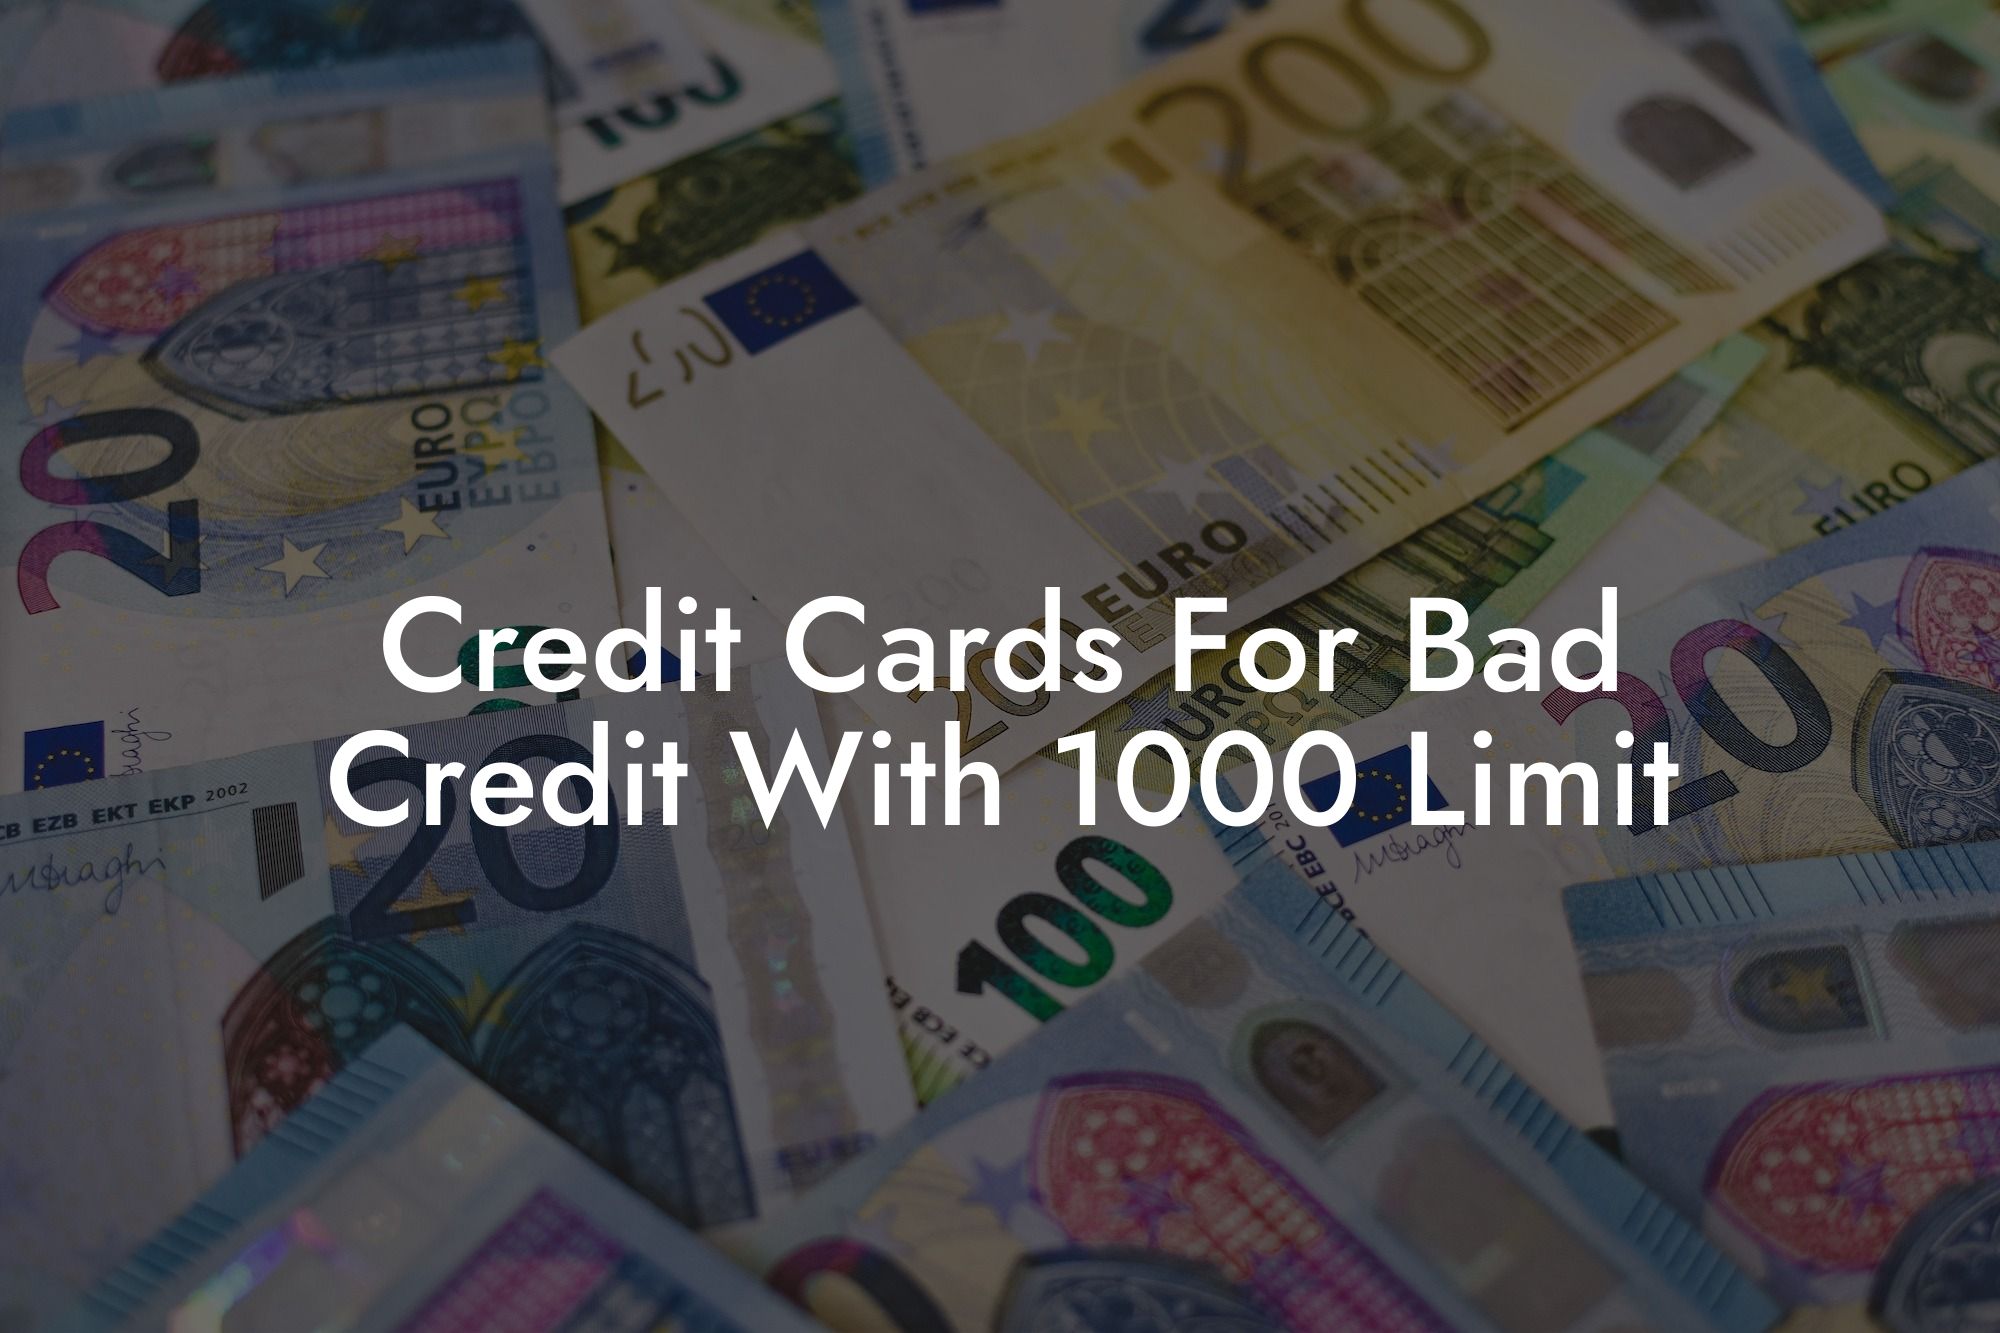 Credit Cards For Bad Credit With 1000 Limit